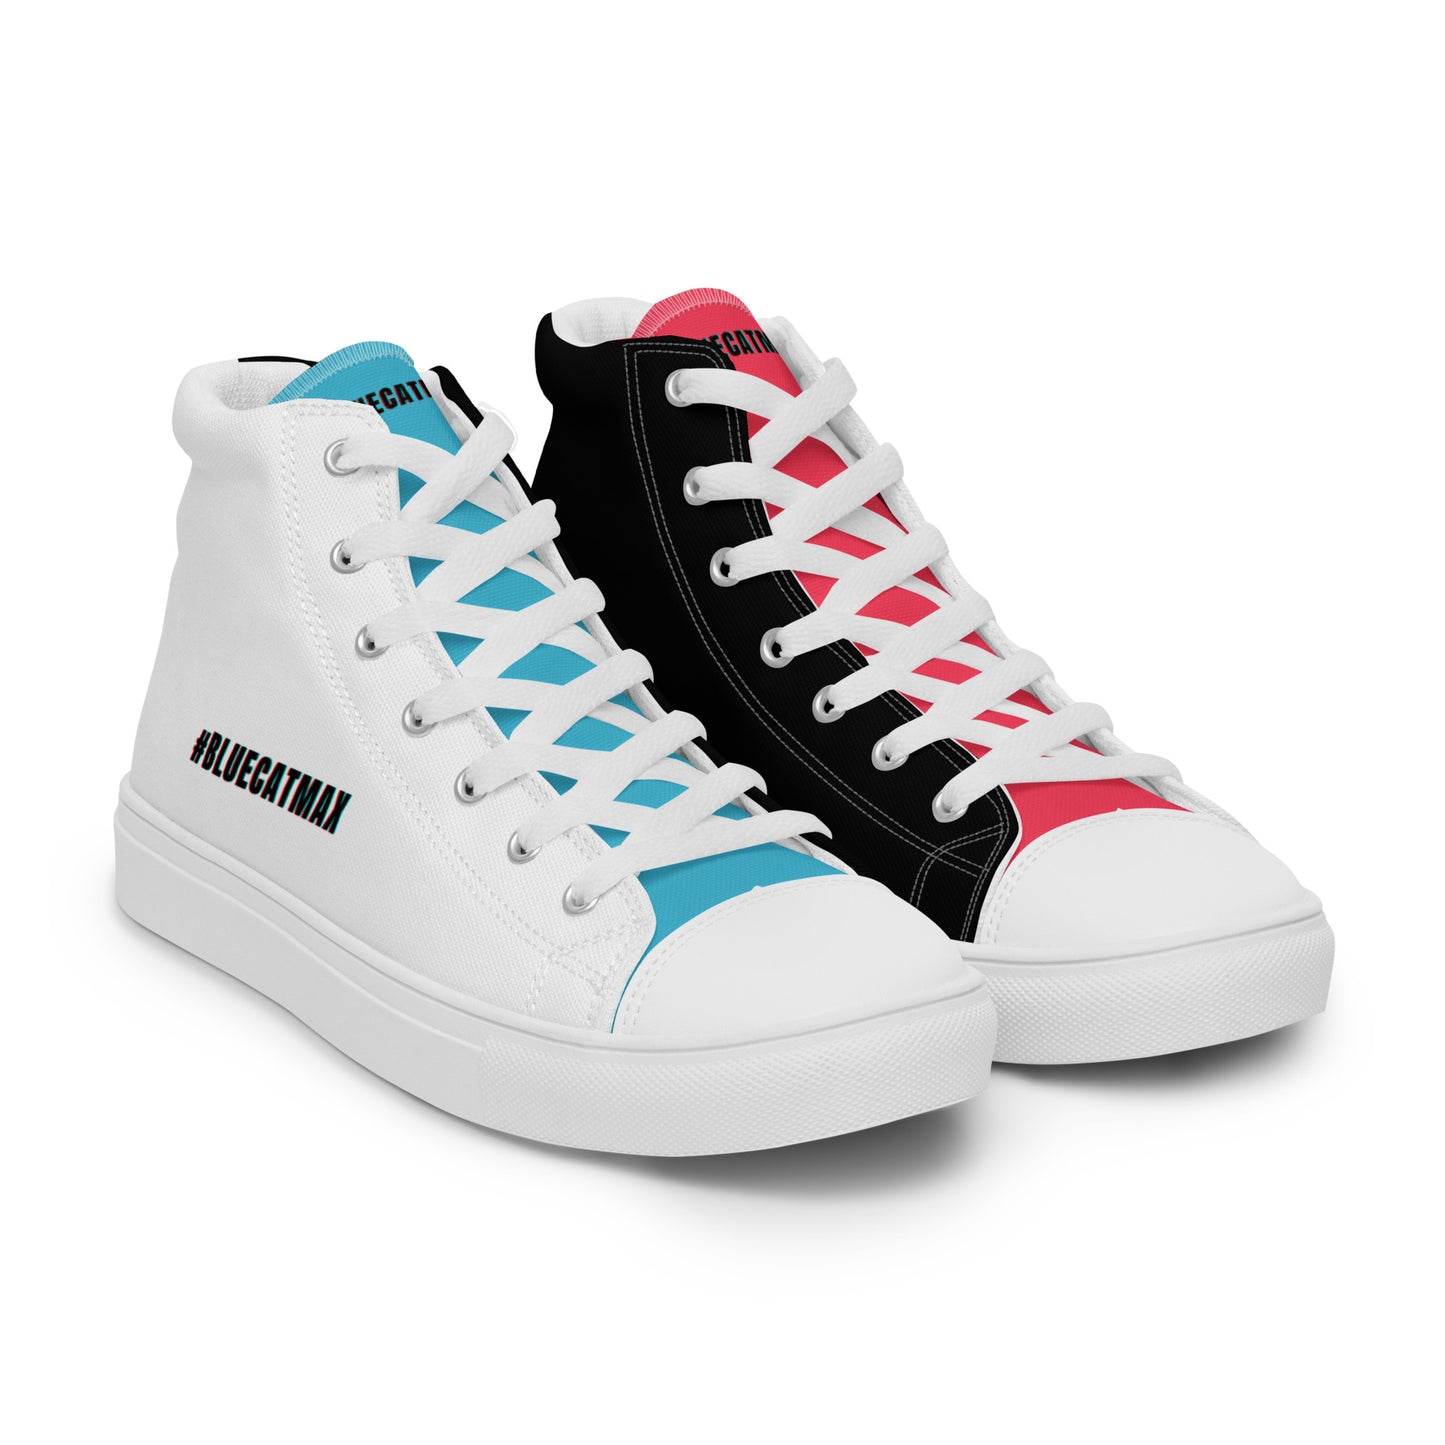 #bluecatmax Women’s High Top Canvas Shoes Comfortable Breathable 5-12.5